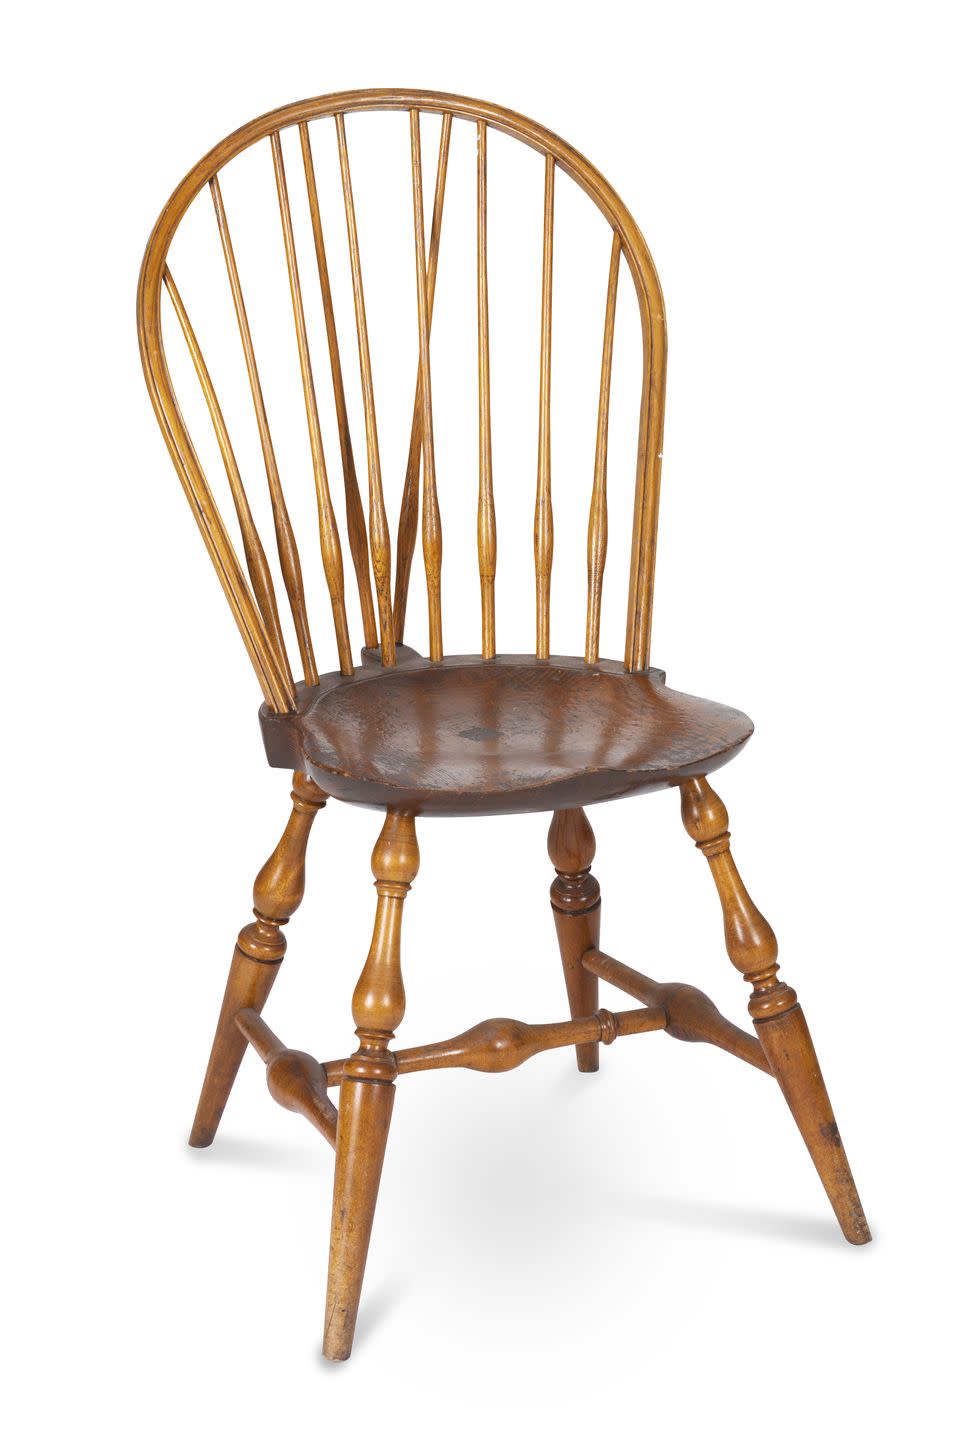 Wallace Nutting Brace-Back Bow-Back Windsor Chair